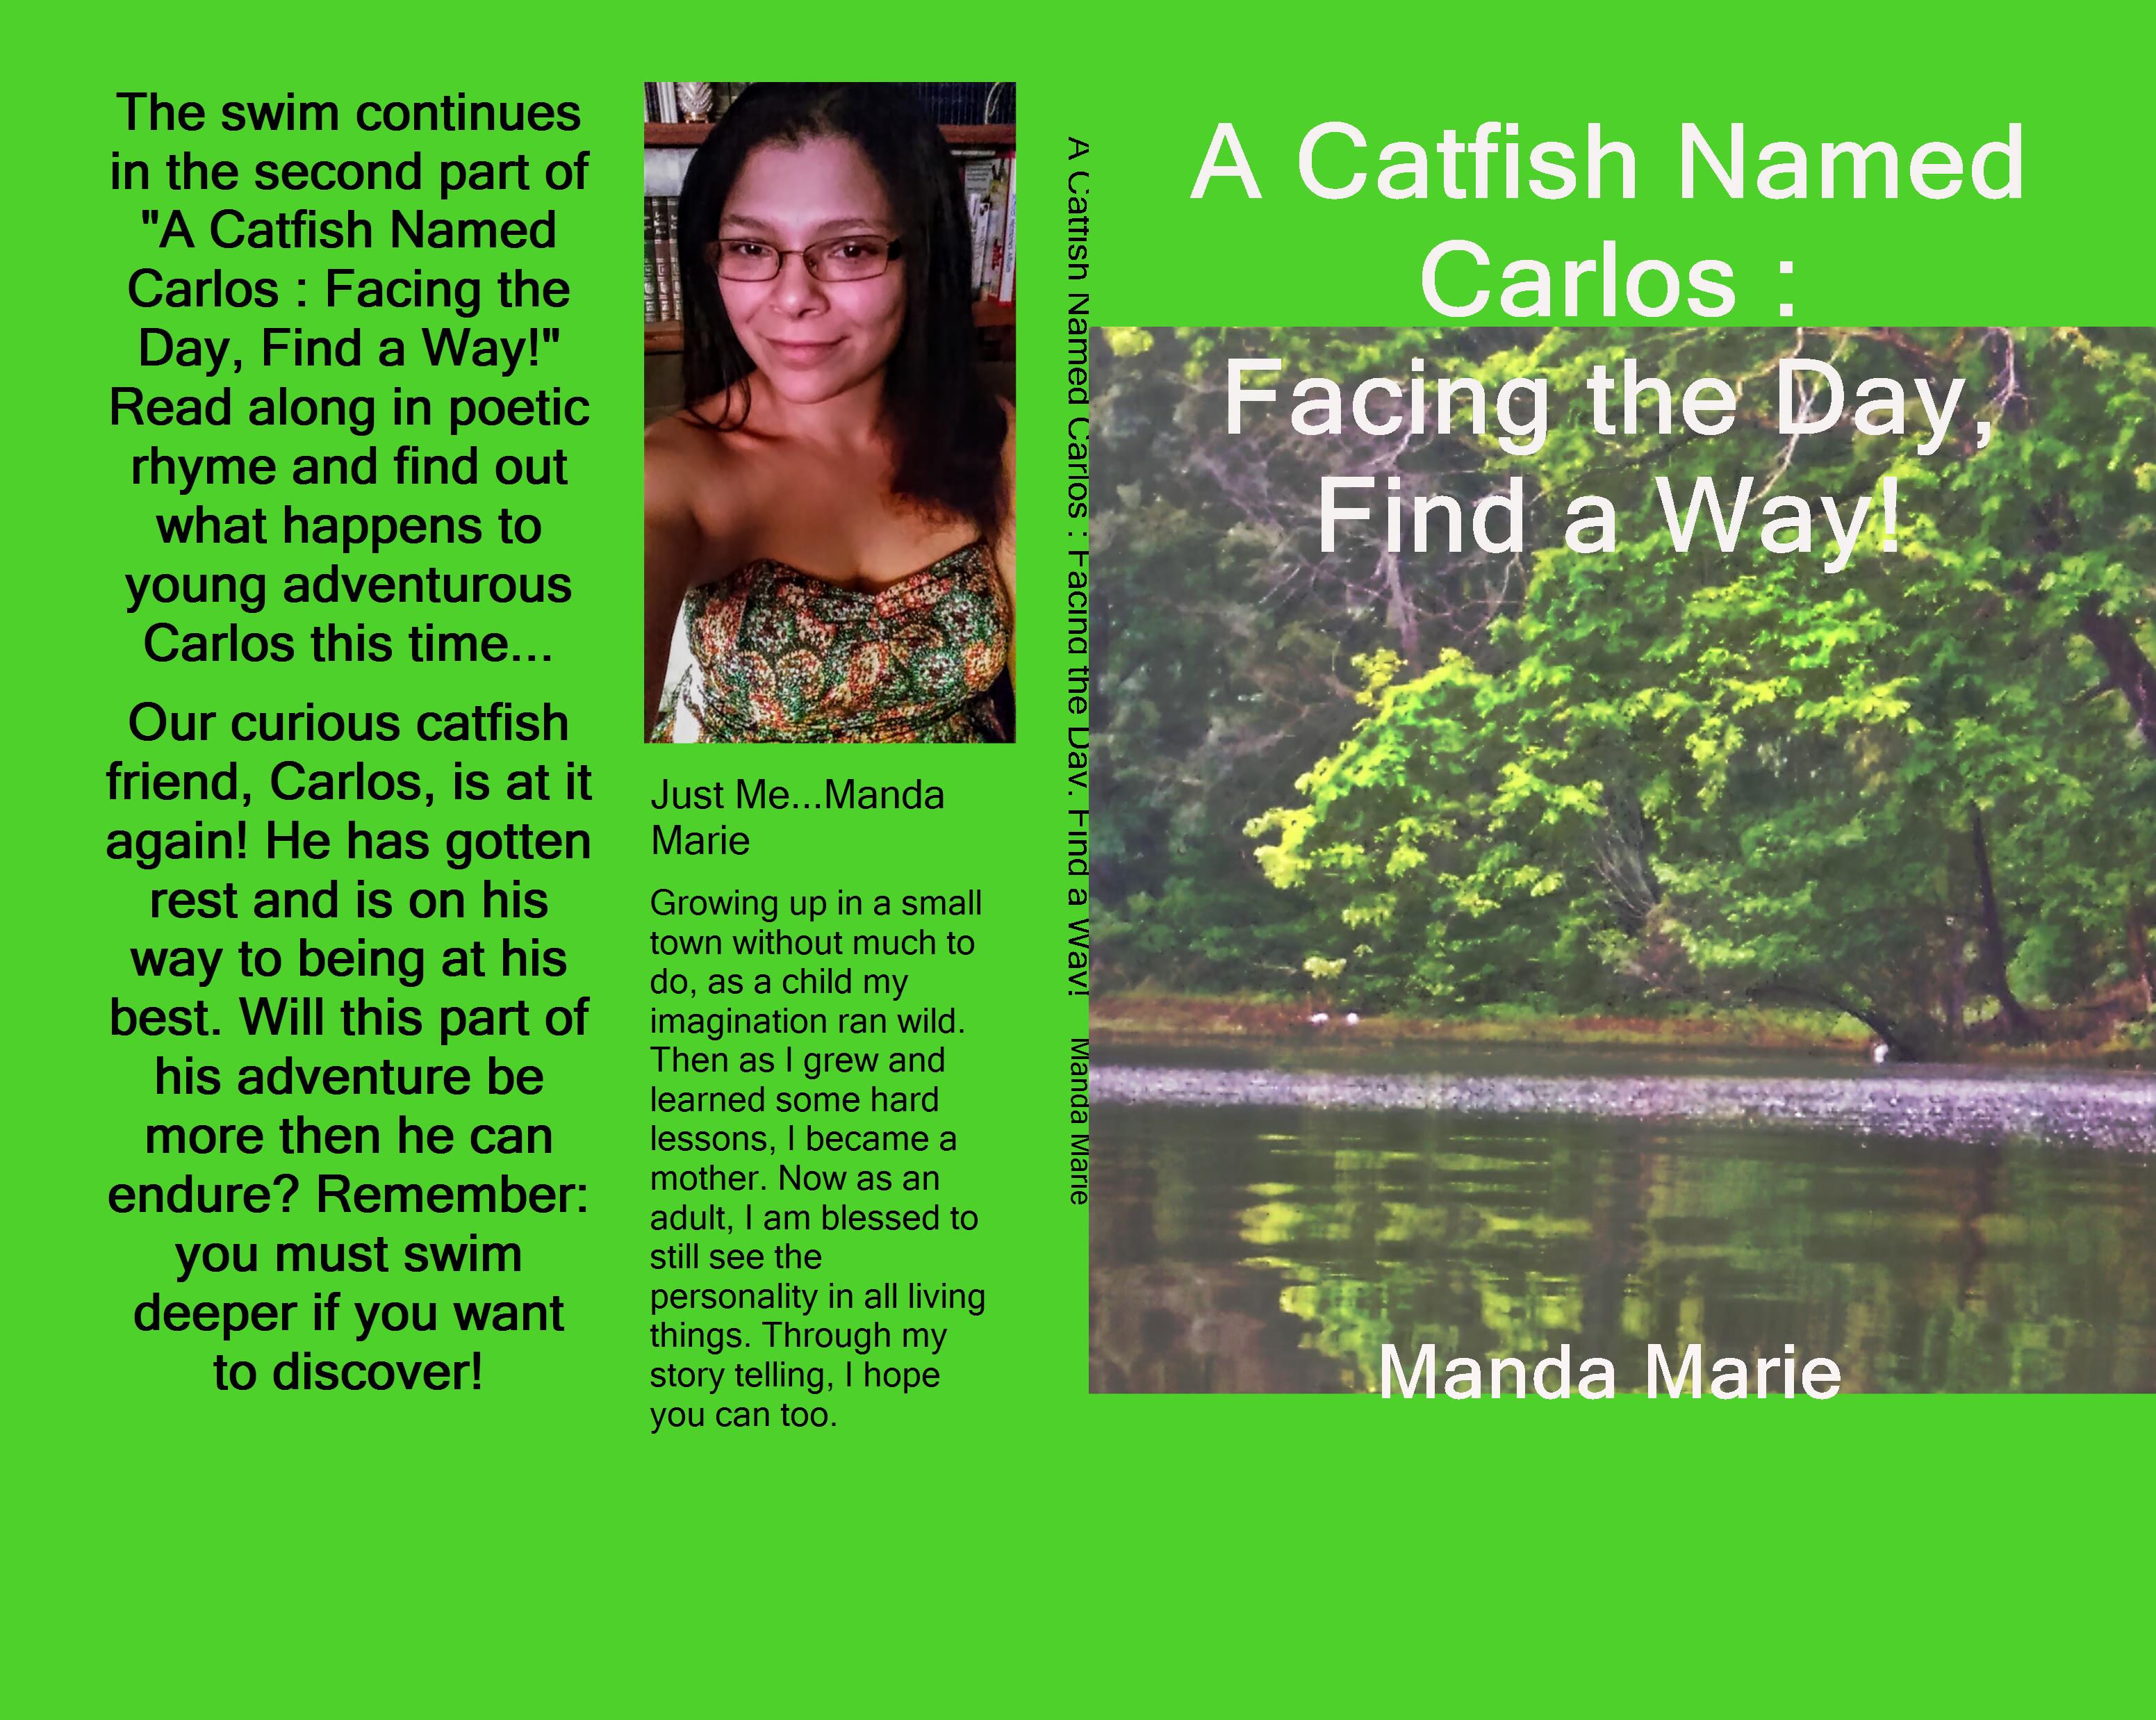 A Catfish Named Carlos : Facing the Day, Find a Way! cover image